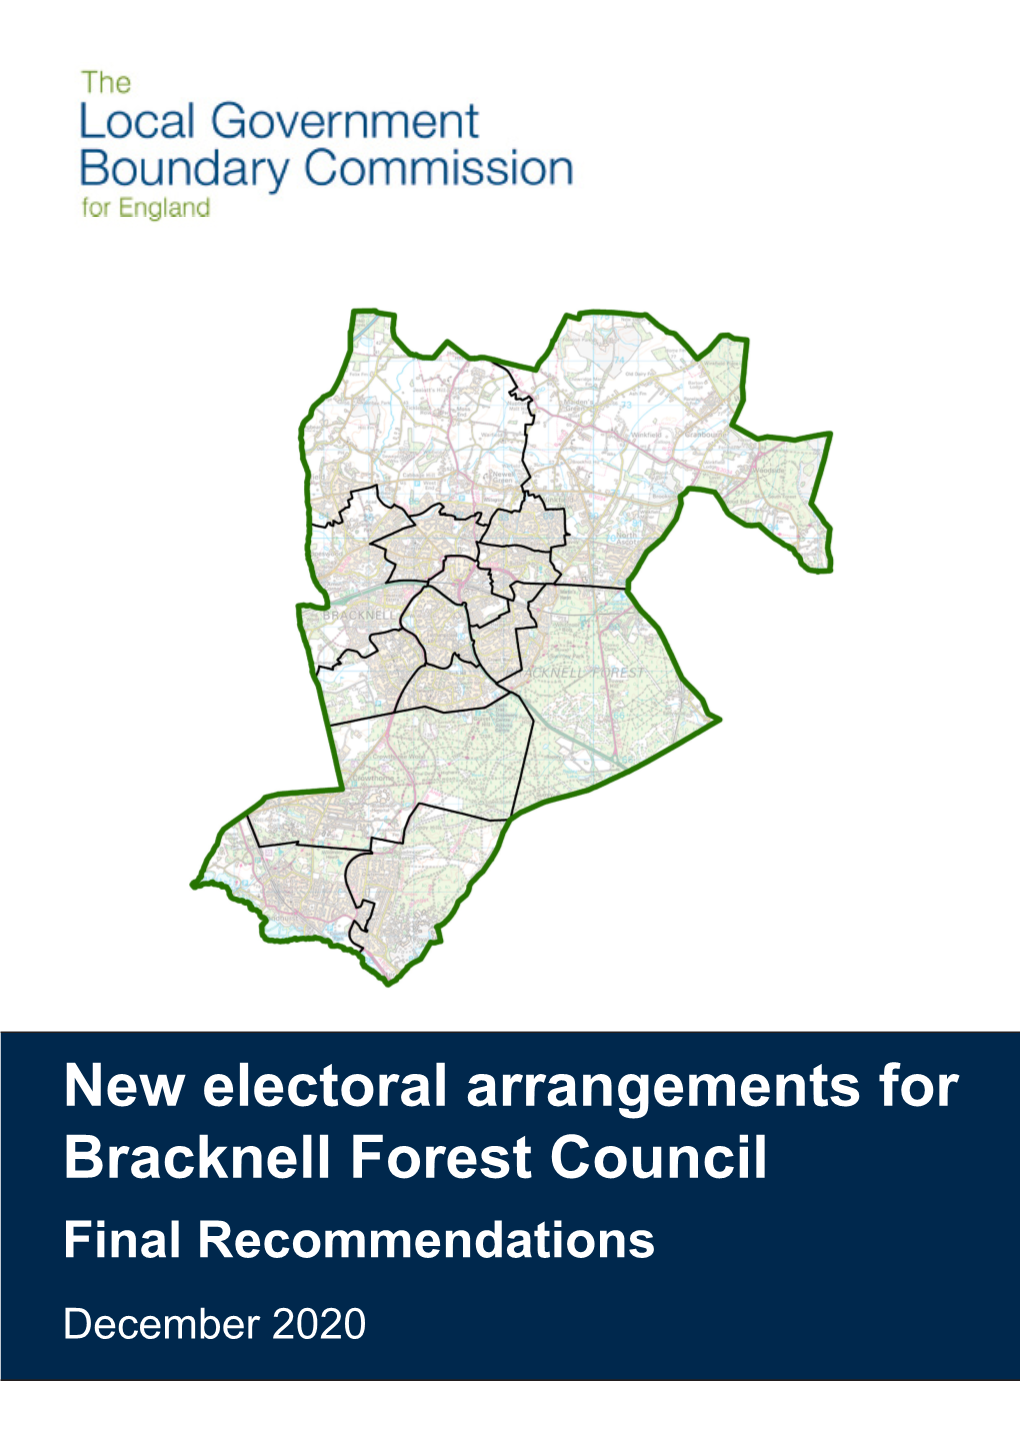 Final Recommendations Report for Bracknell Forest Council